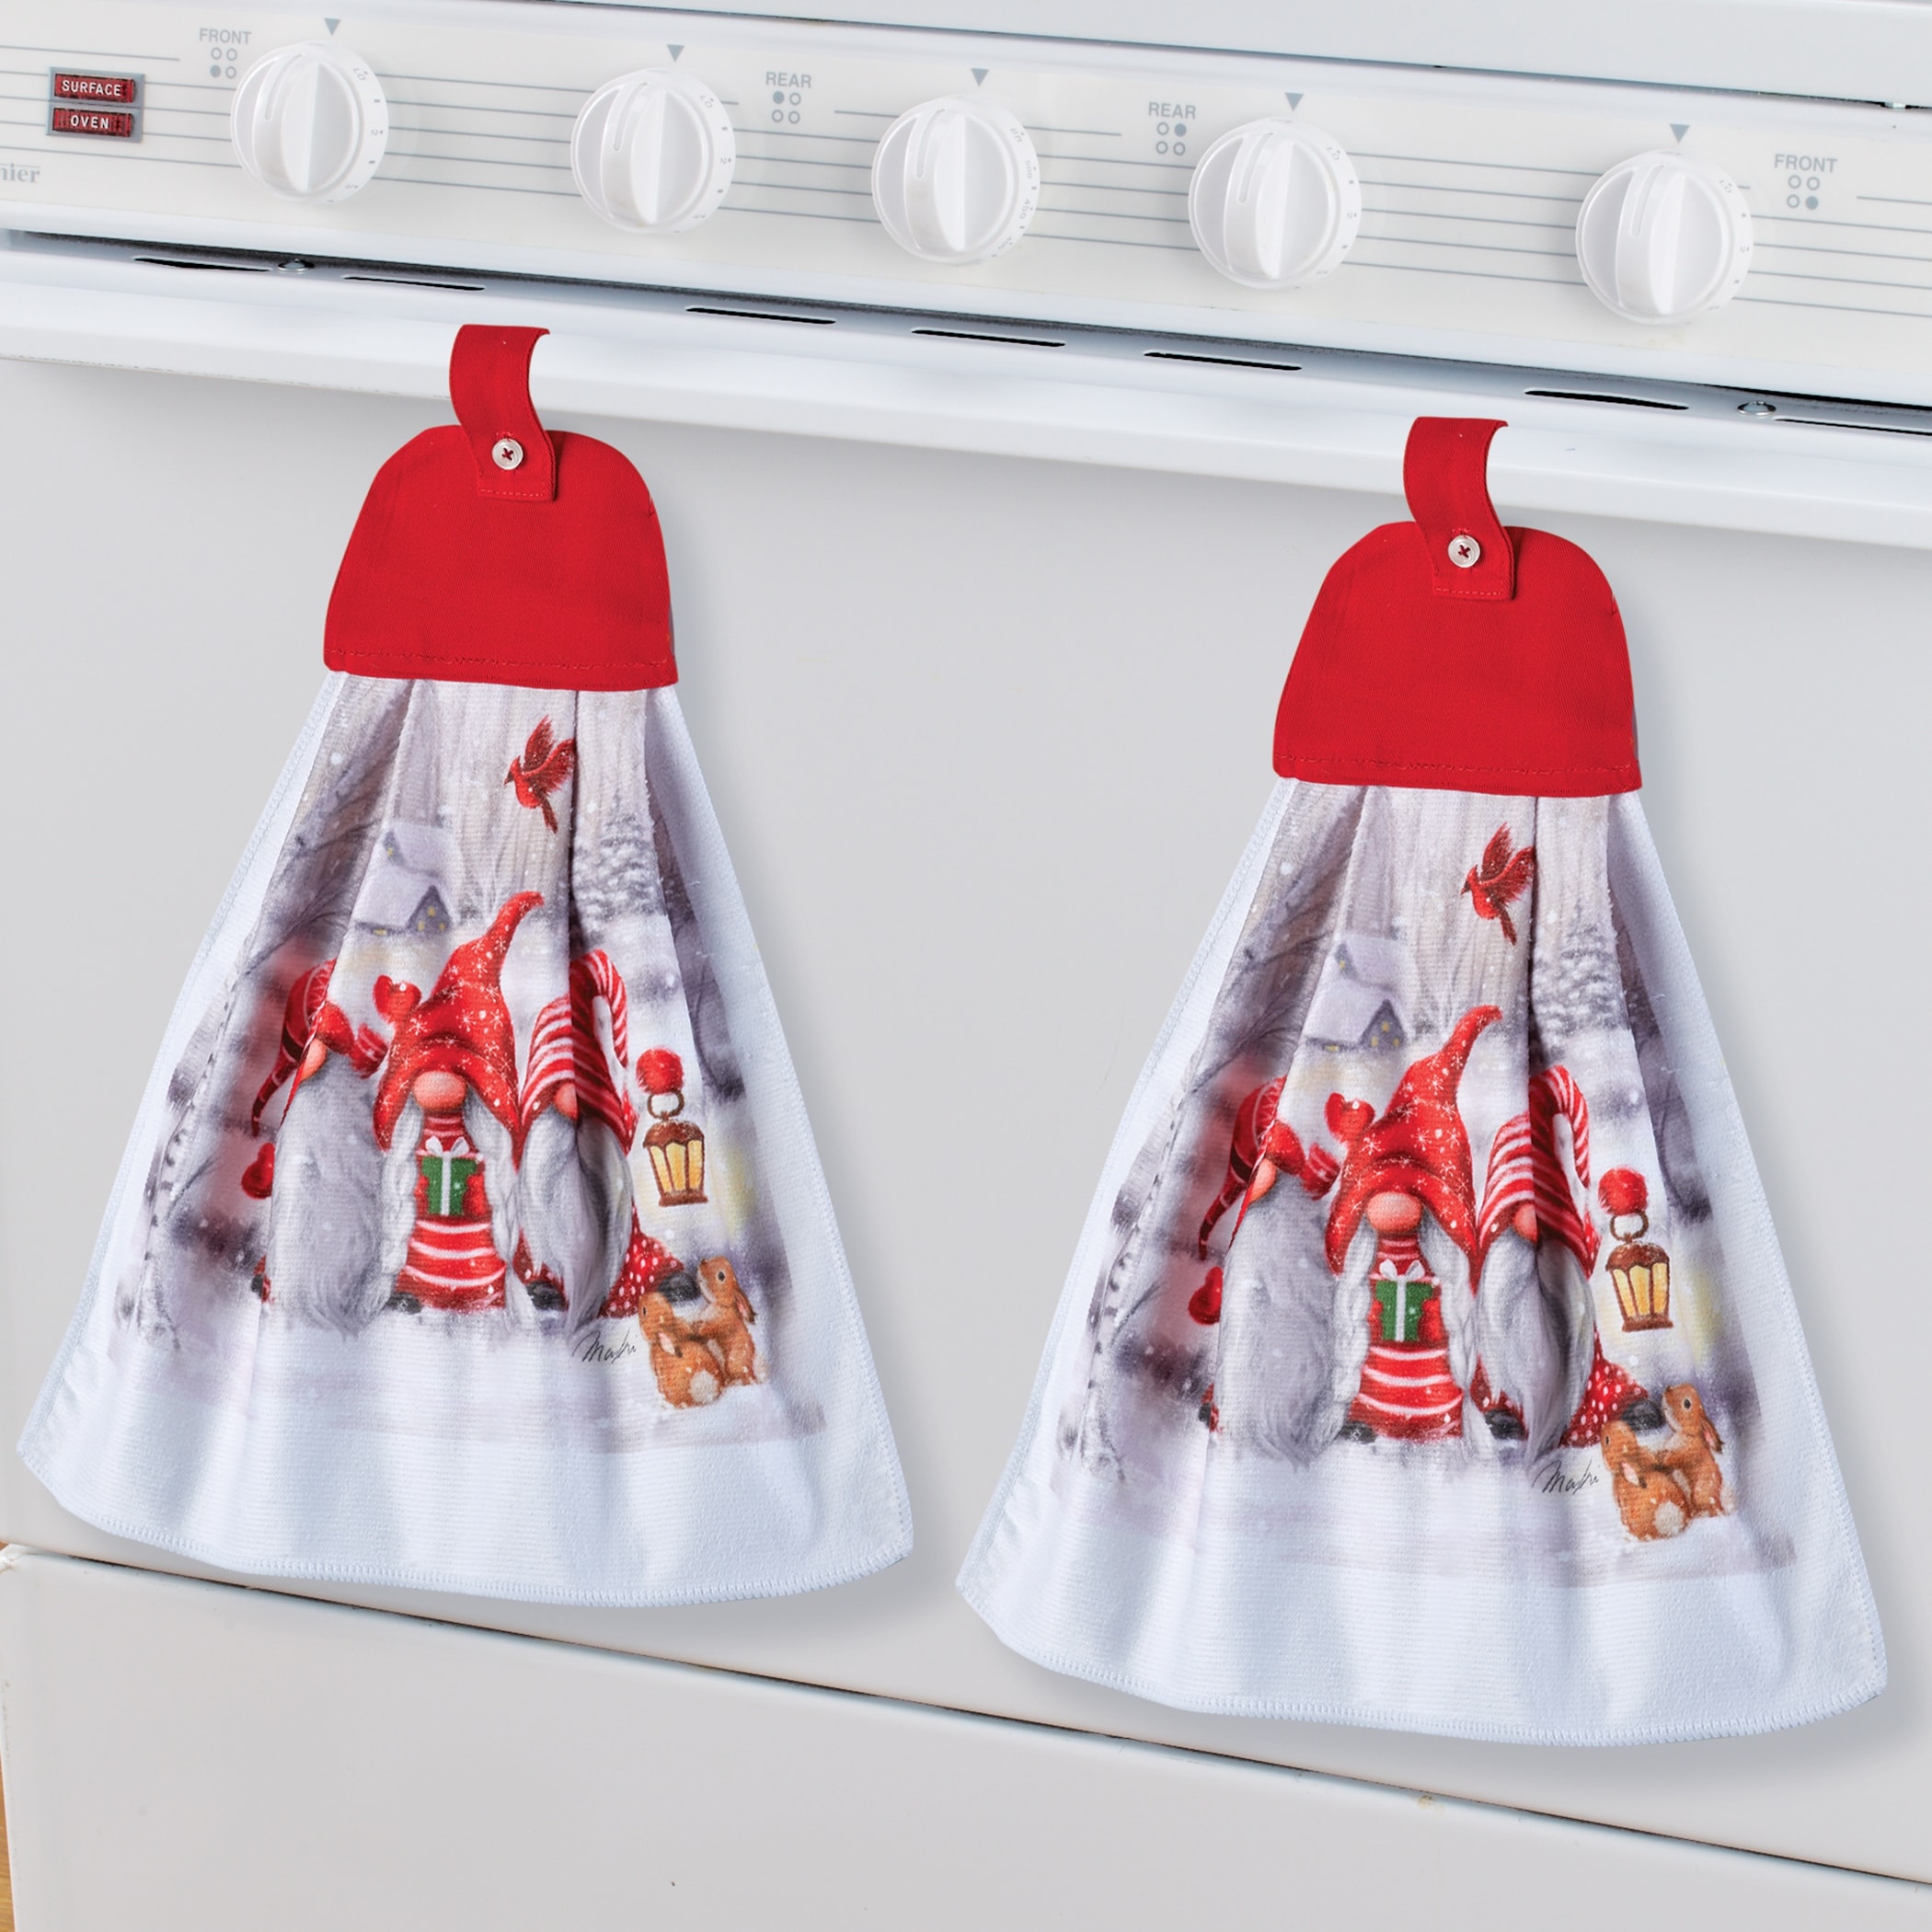 https://ak1.ostkcdn.com/images/products/is/images/direct/a70a5d6fe5a6b3d2b72a5dcf869ea528750a4894/Festive-Gnome-Hanging-Kitchen-Towels---Set-of-2.jpg